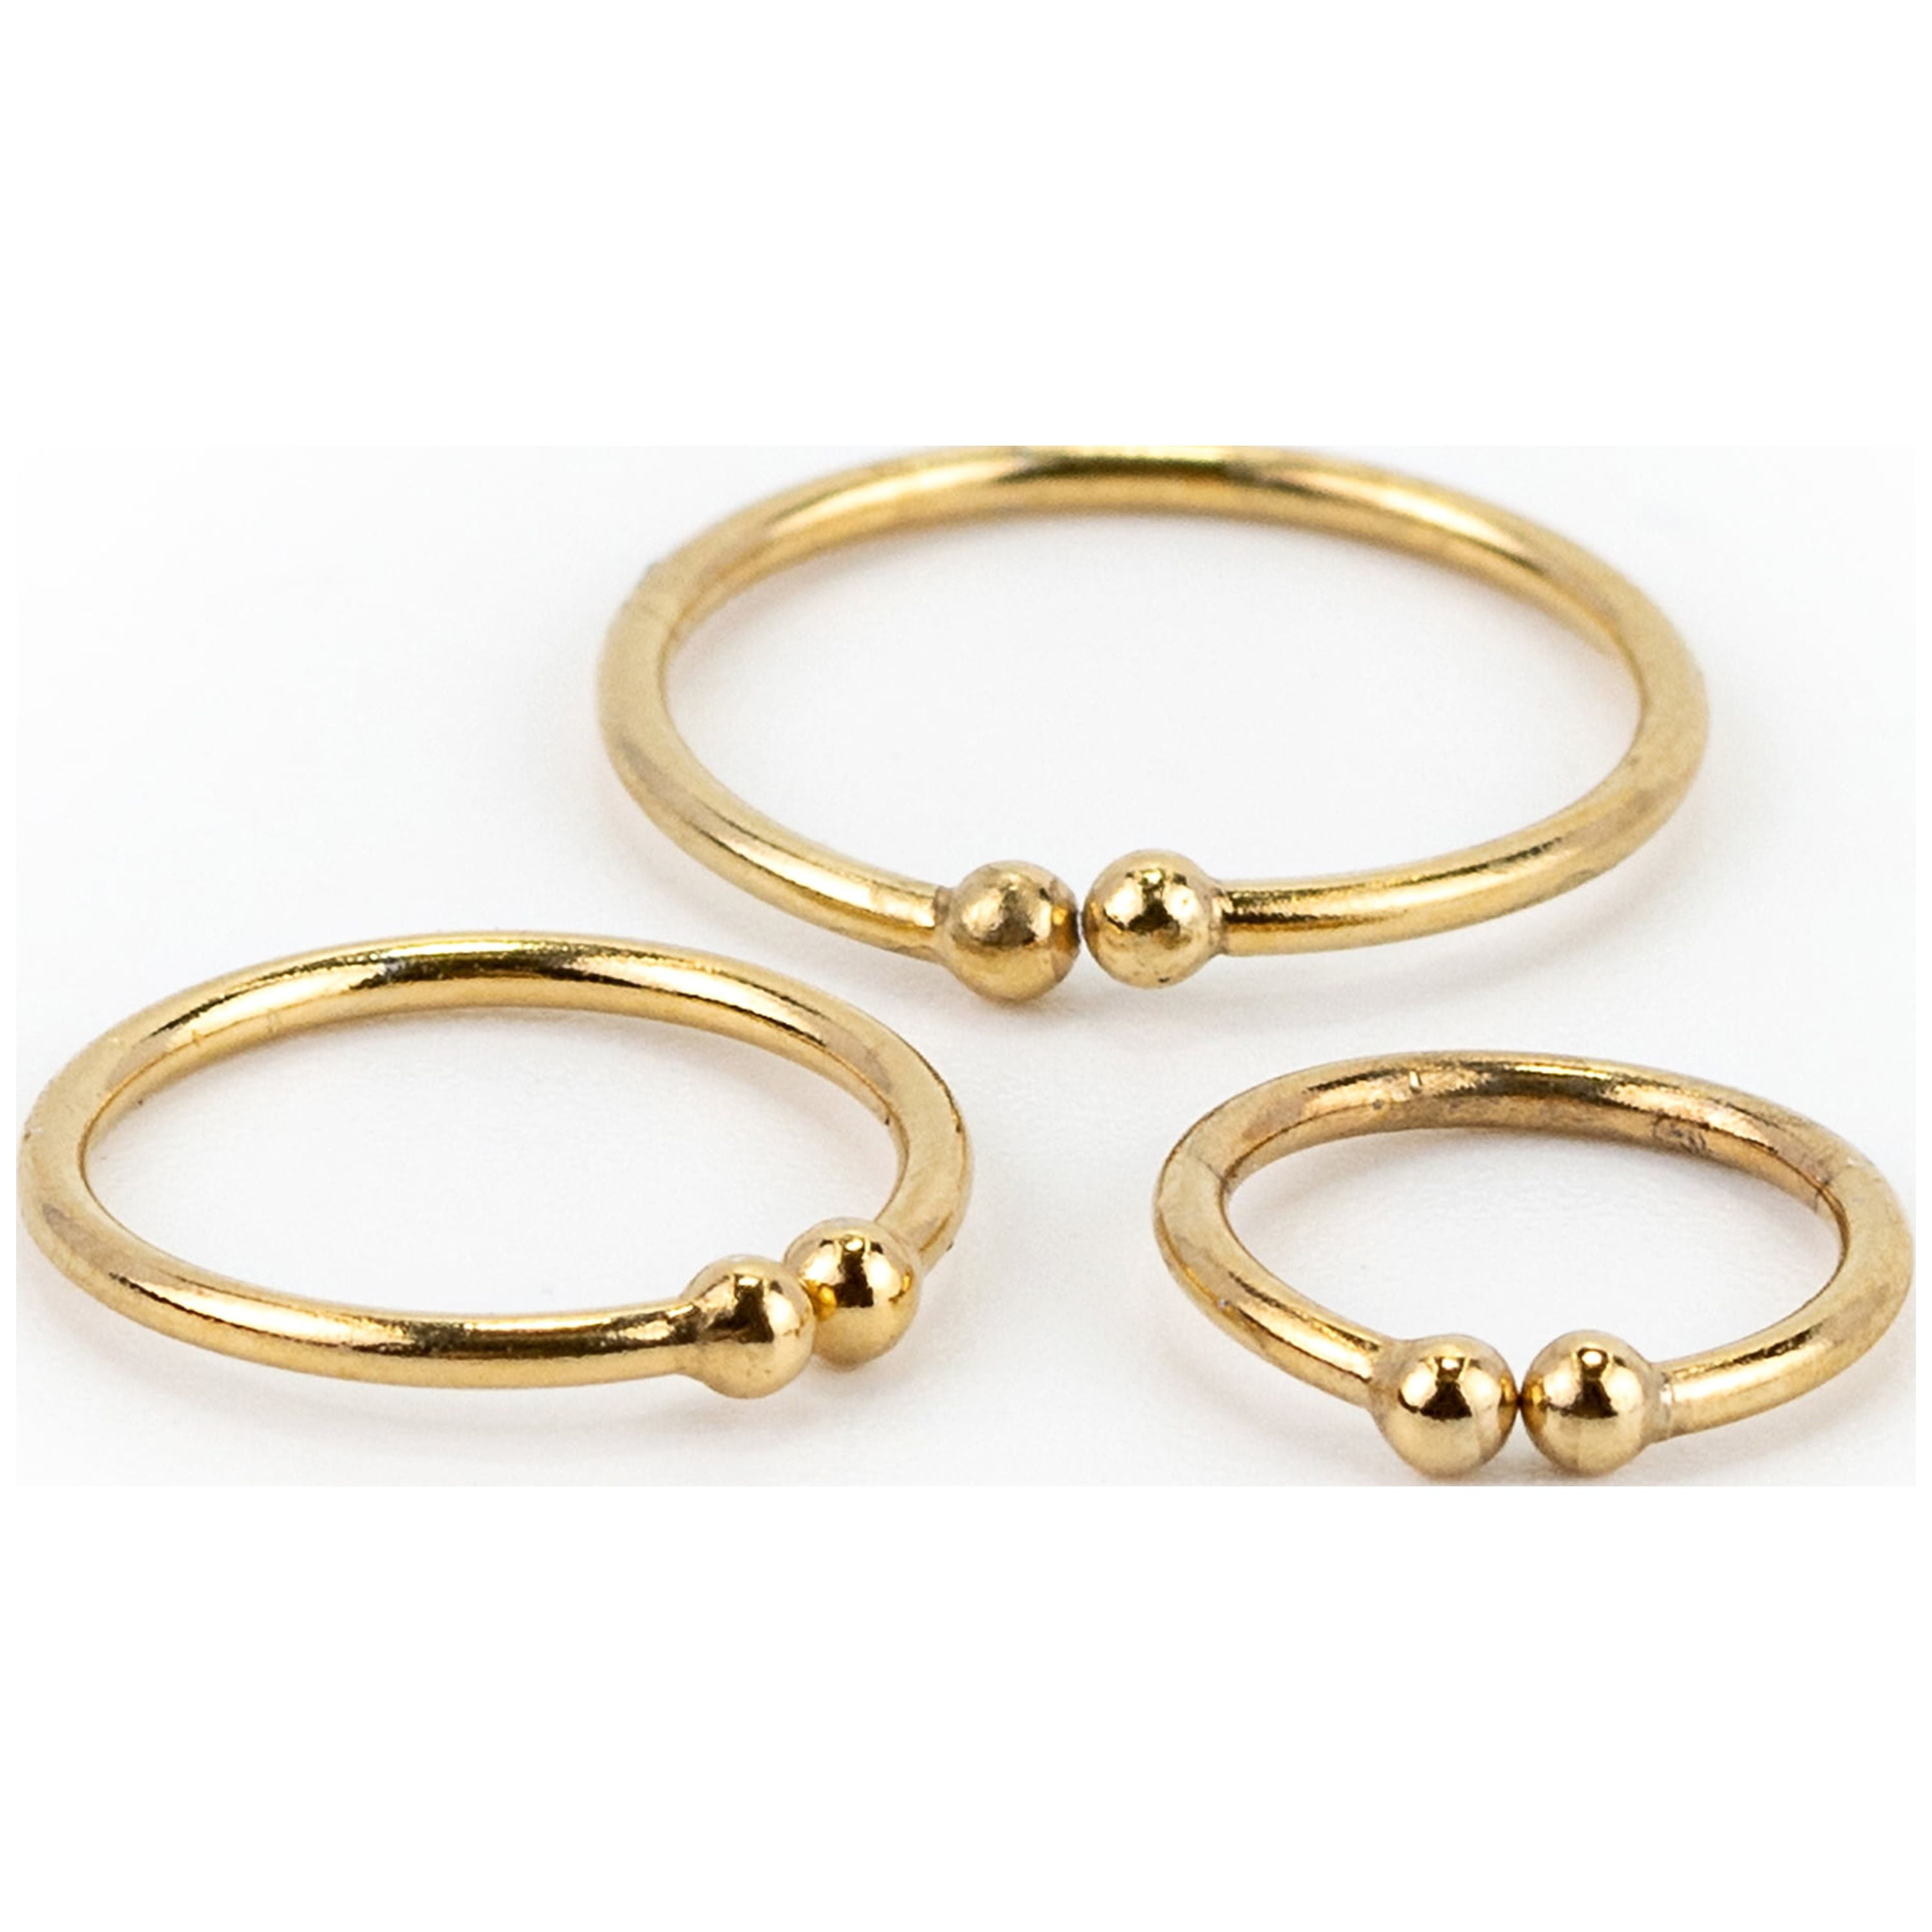 Claire's Women's Graduated Gold Faux Nose Hoop Rings, Cuff Closure